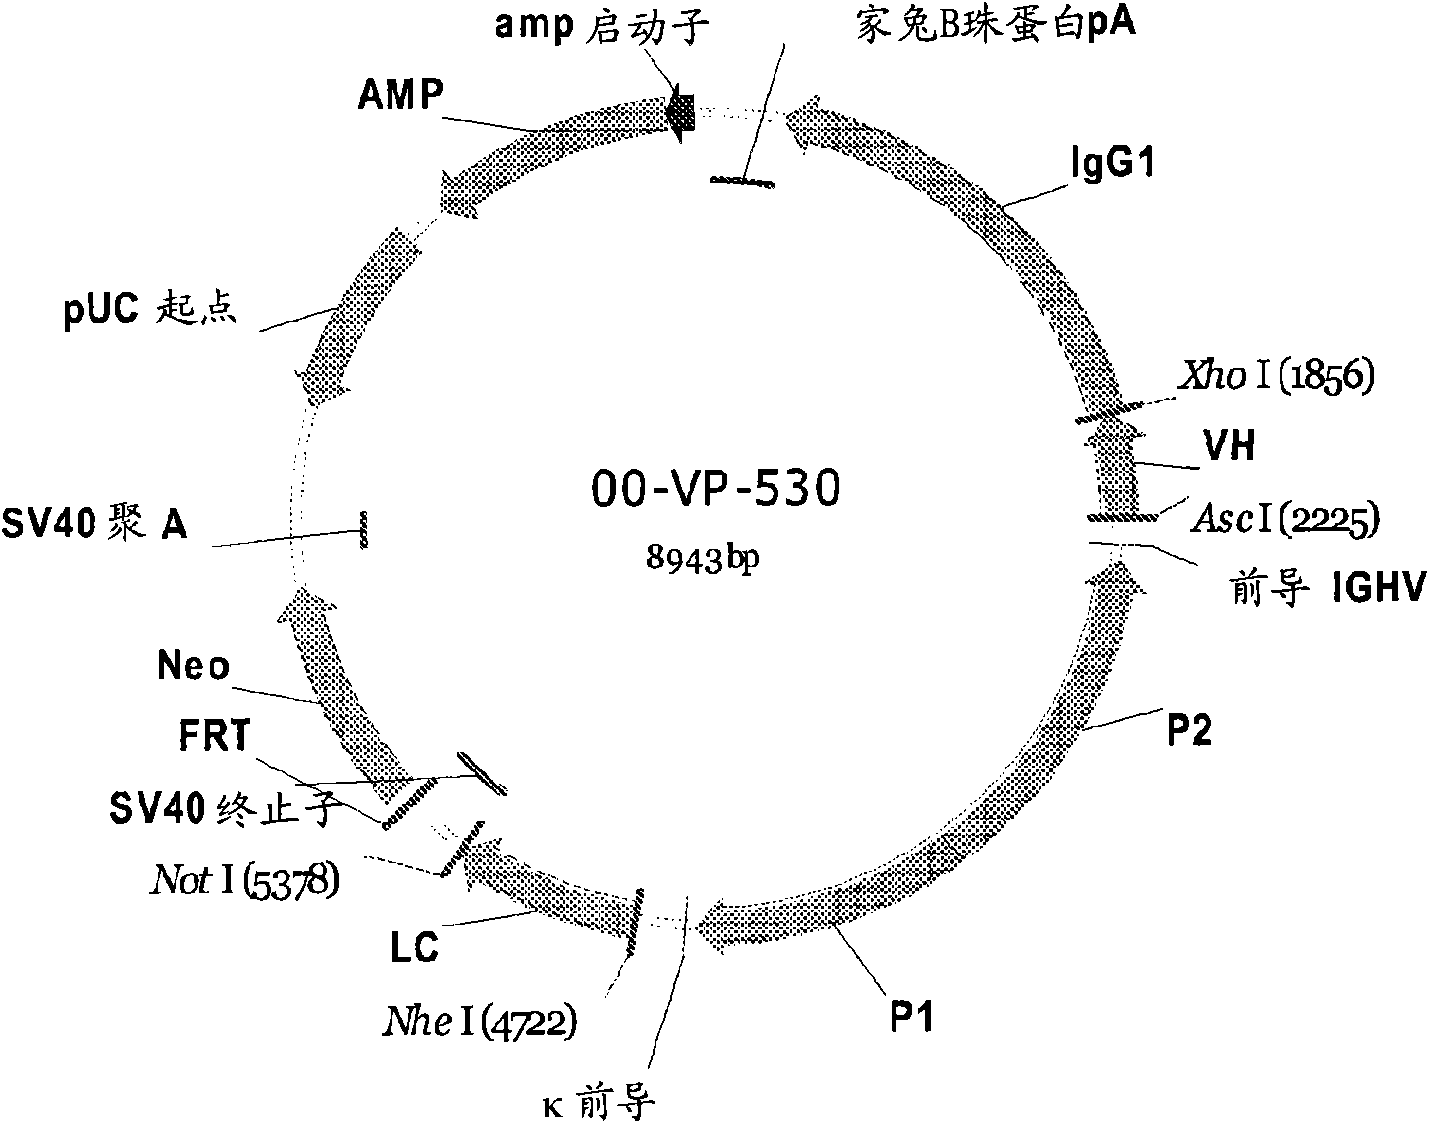 Recombinant antibodies for treatment of respiratory syncytial virus infections